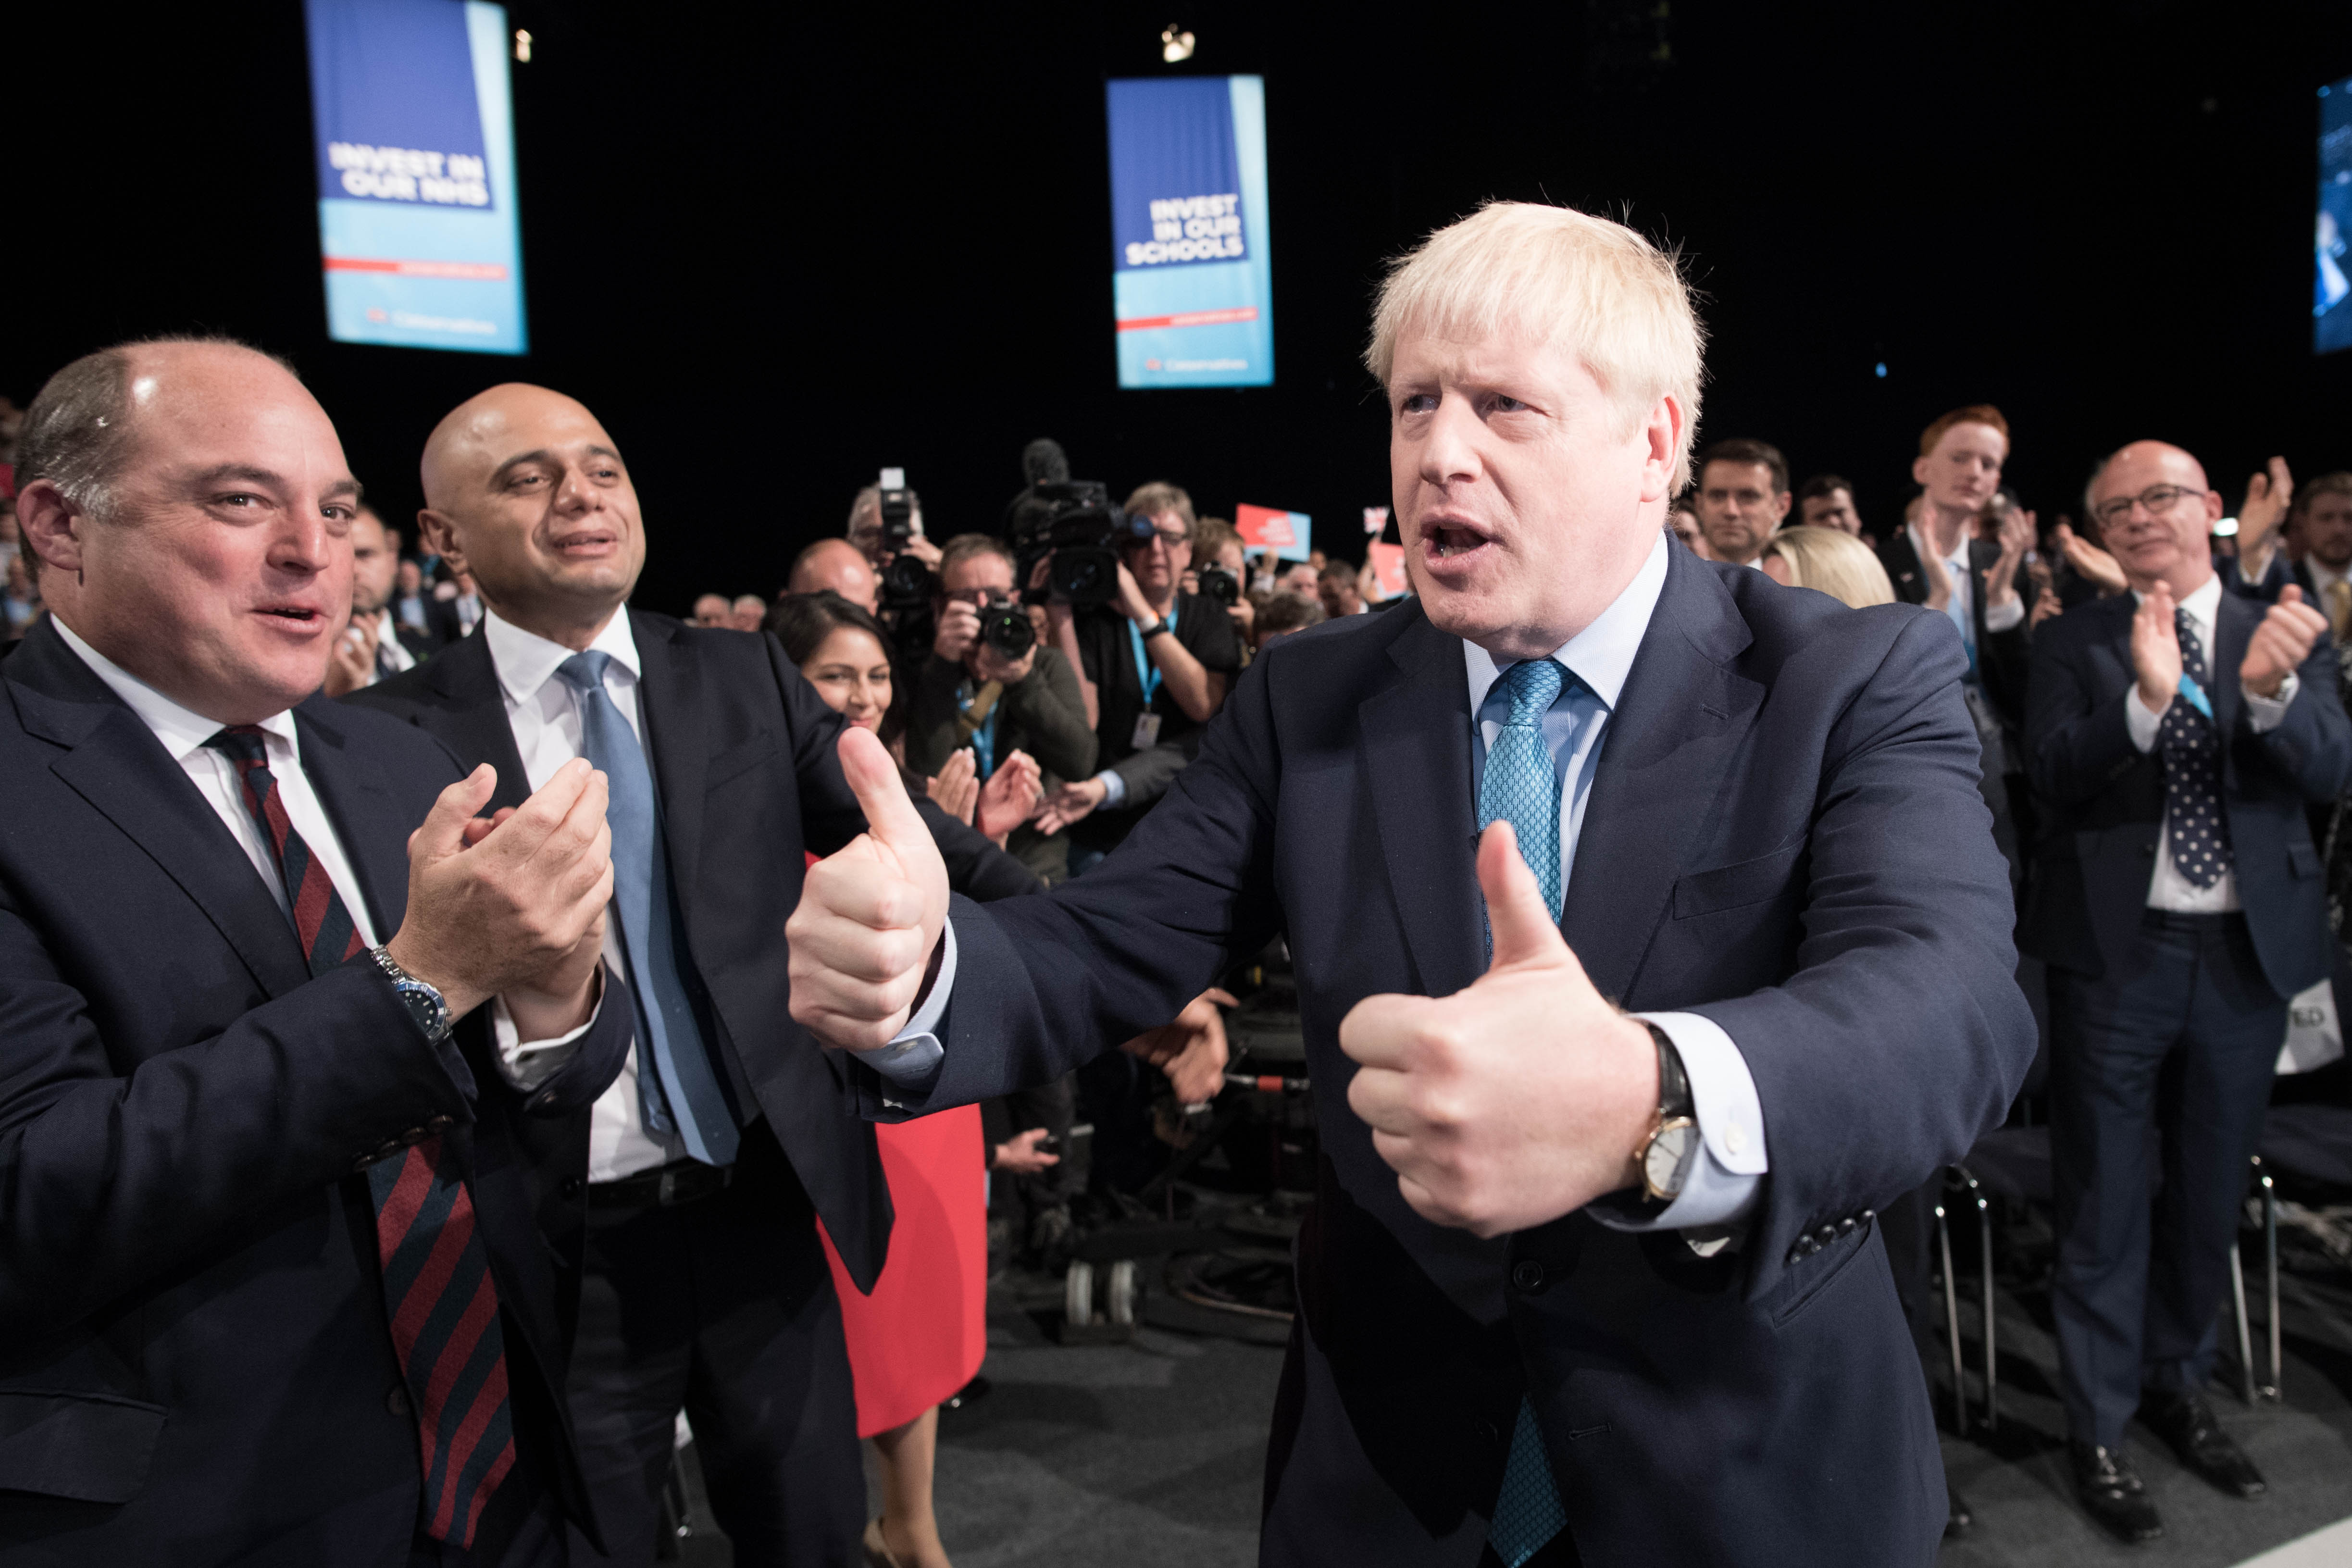 Prime Minister Boris Johnson gives a thumbs up as he leaves the stage after delivering his speech during the Conservative Party Conference at the Manchester Convention Centre.